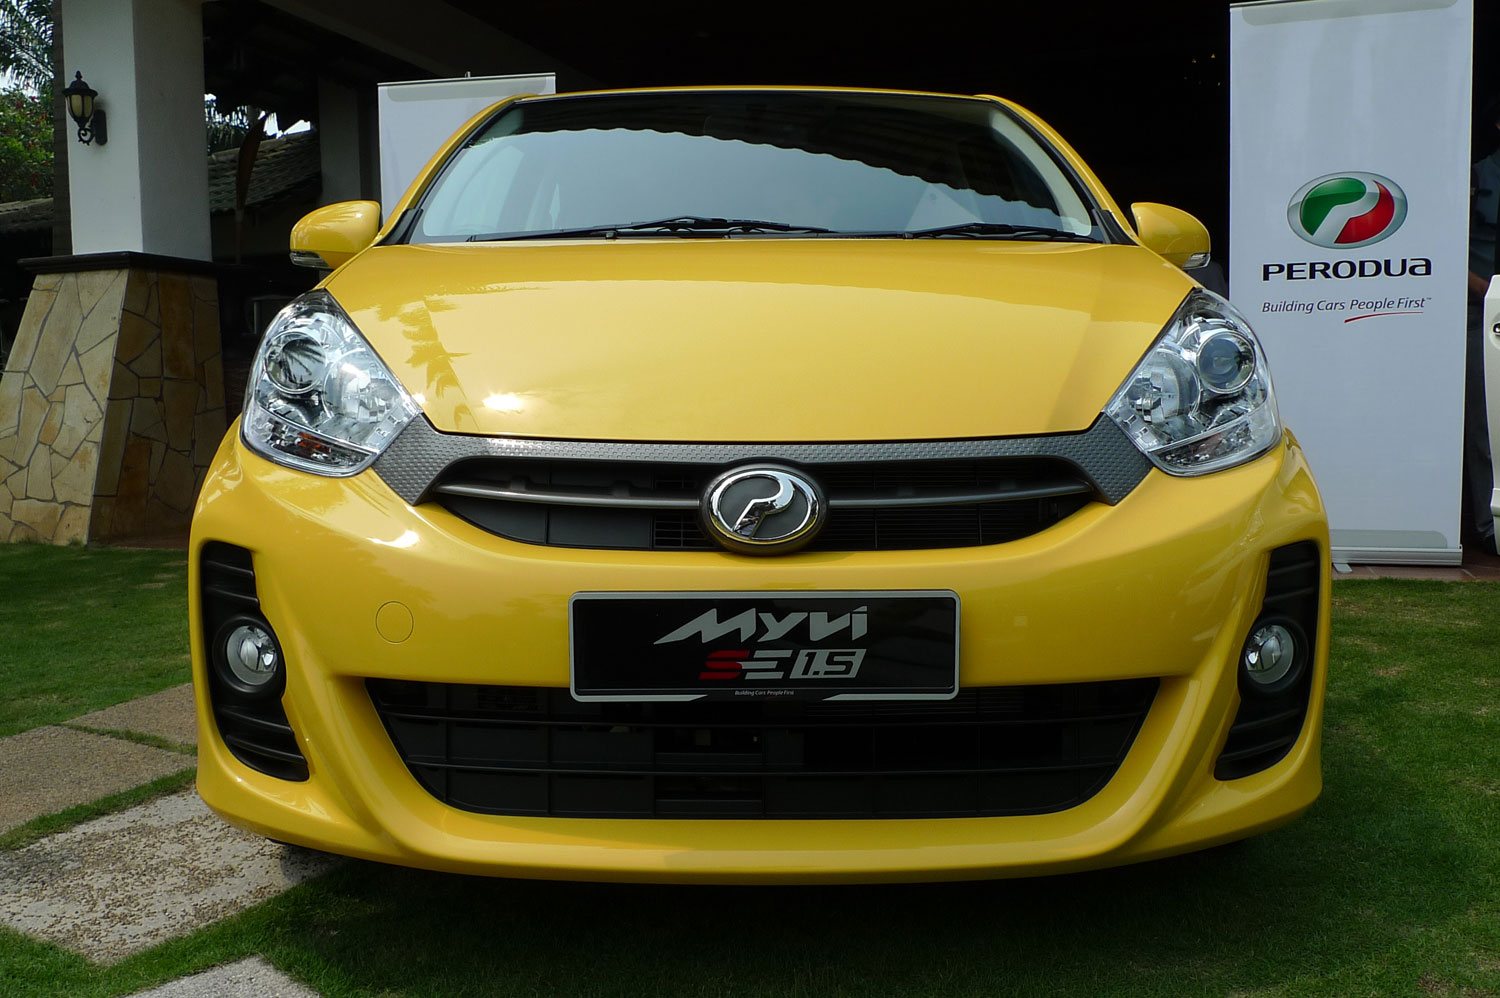 Perodua Myvi SE 1.5 and Extreme Launch and Test Drive Review P1040192b